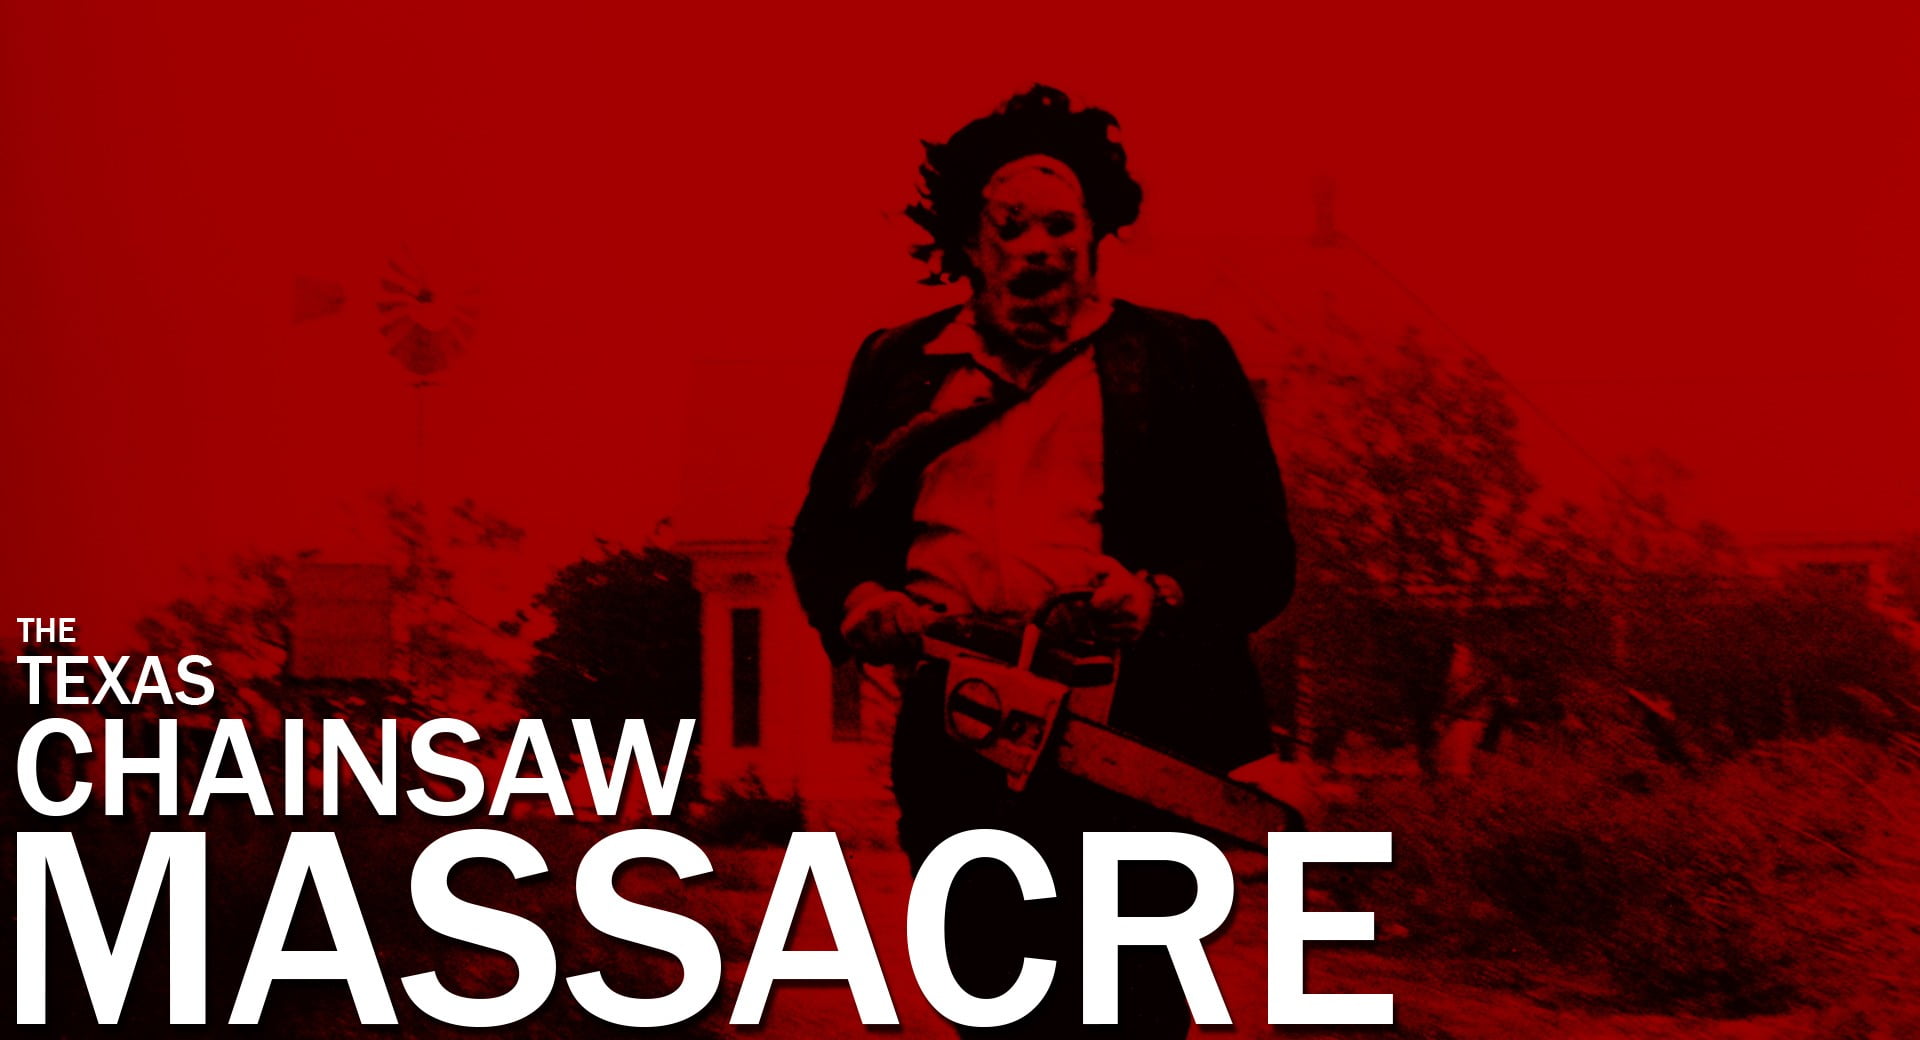 2736x1824 resolution | red background The Texas Chainsaw Massacre text ...